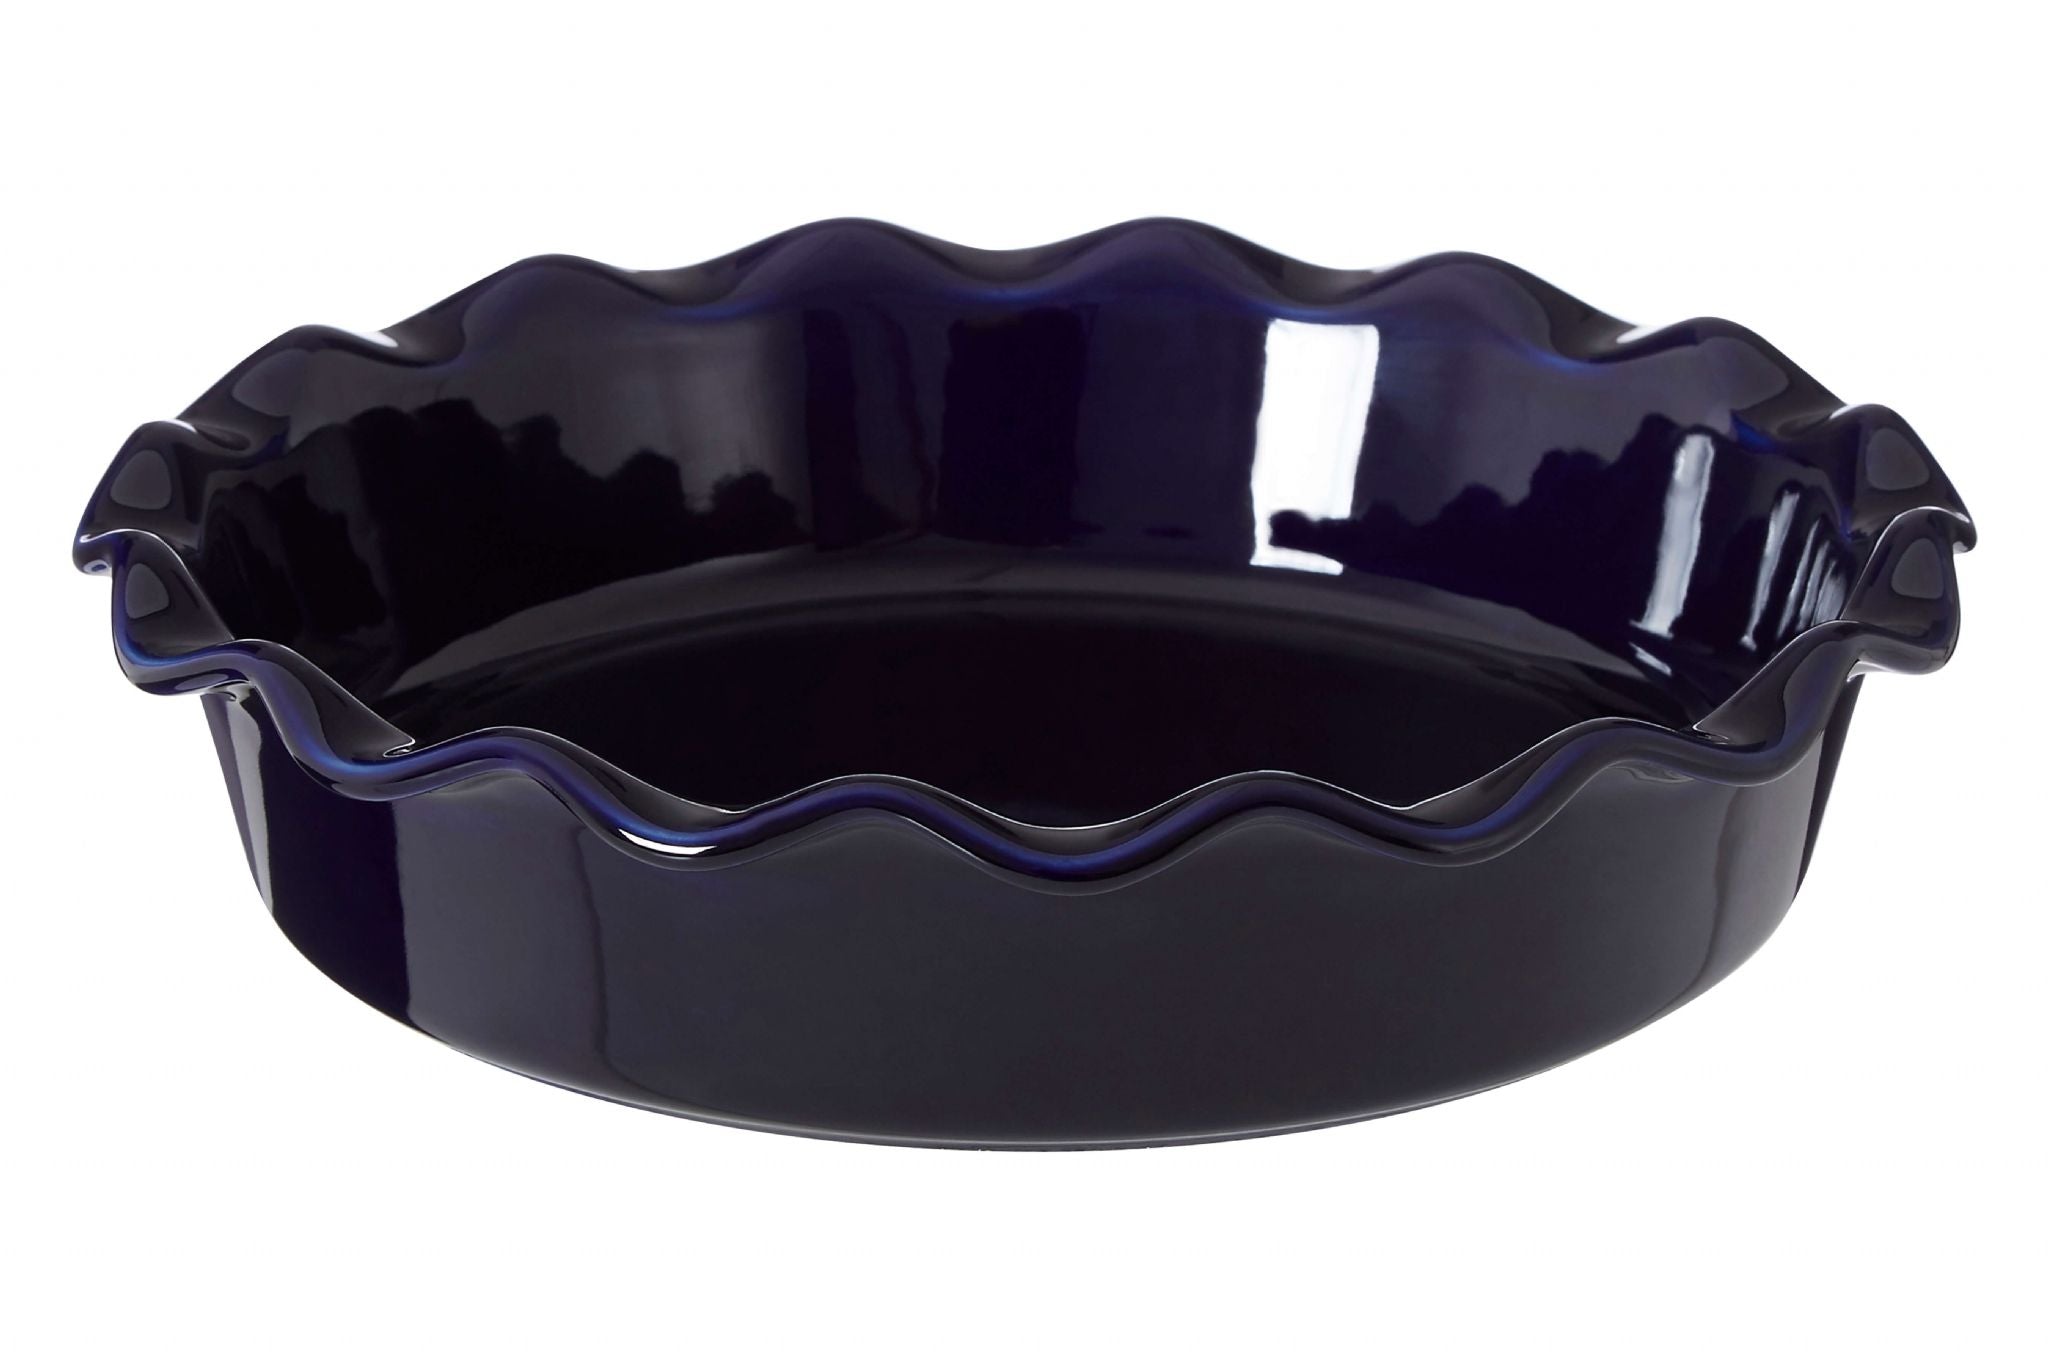 Blue Stoneware Pie Dish - Outlet - Save 20%